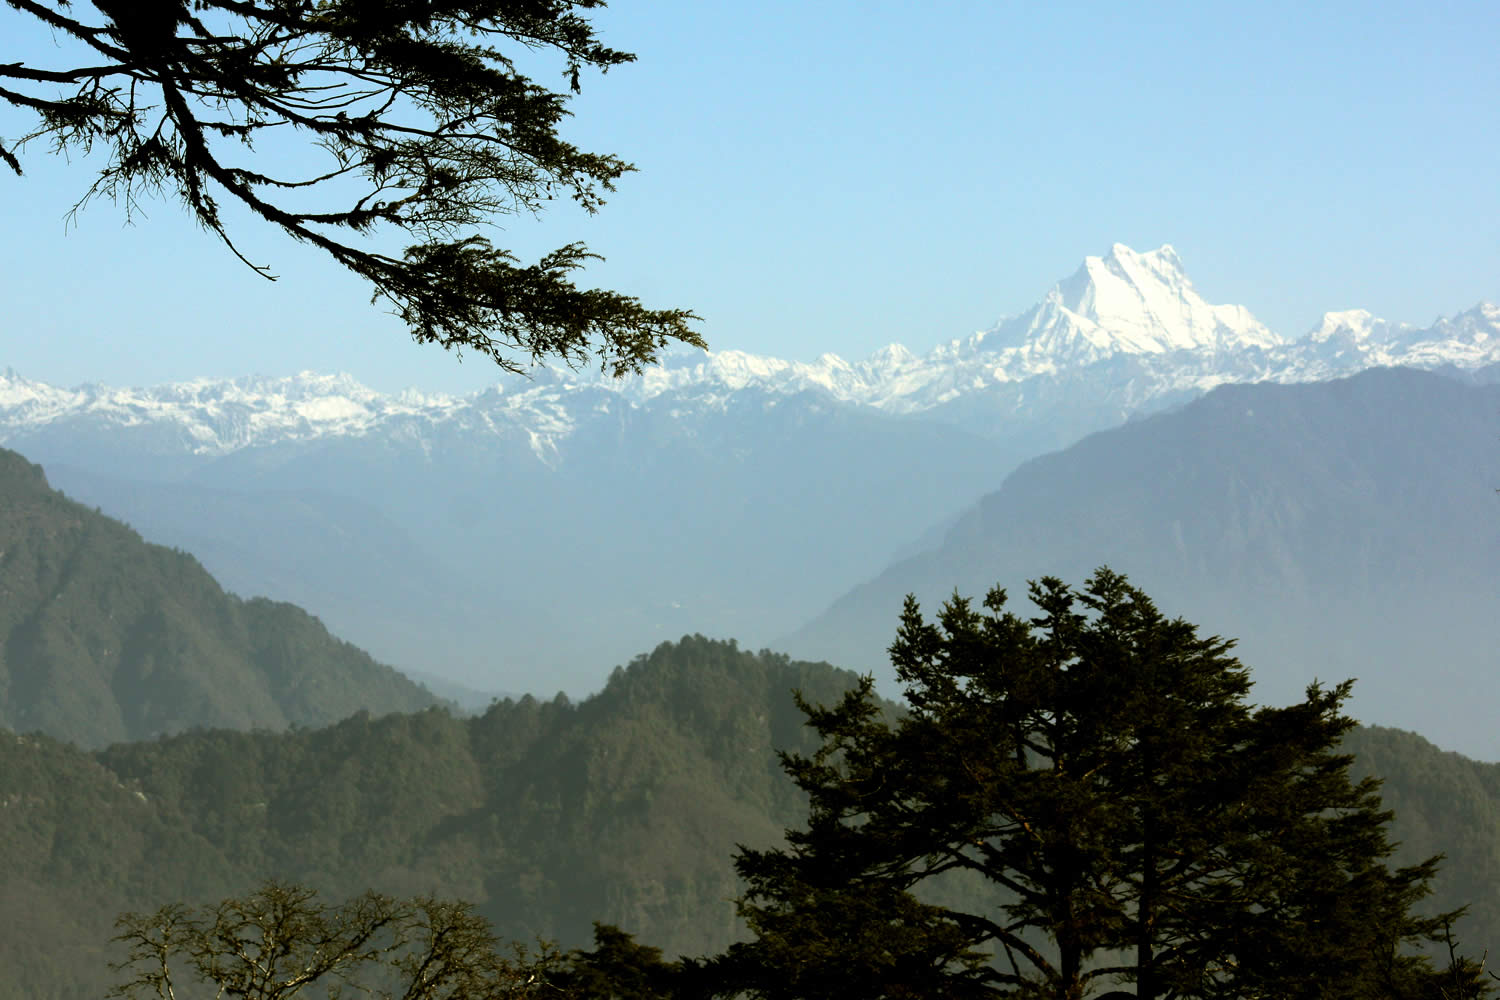 View of the Himalayan range from Dochula Pass.